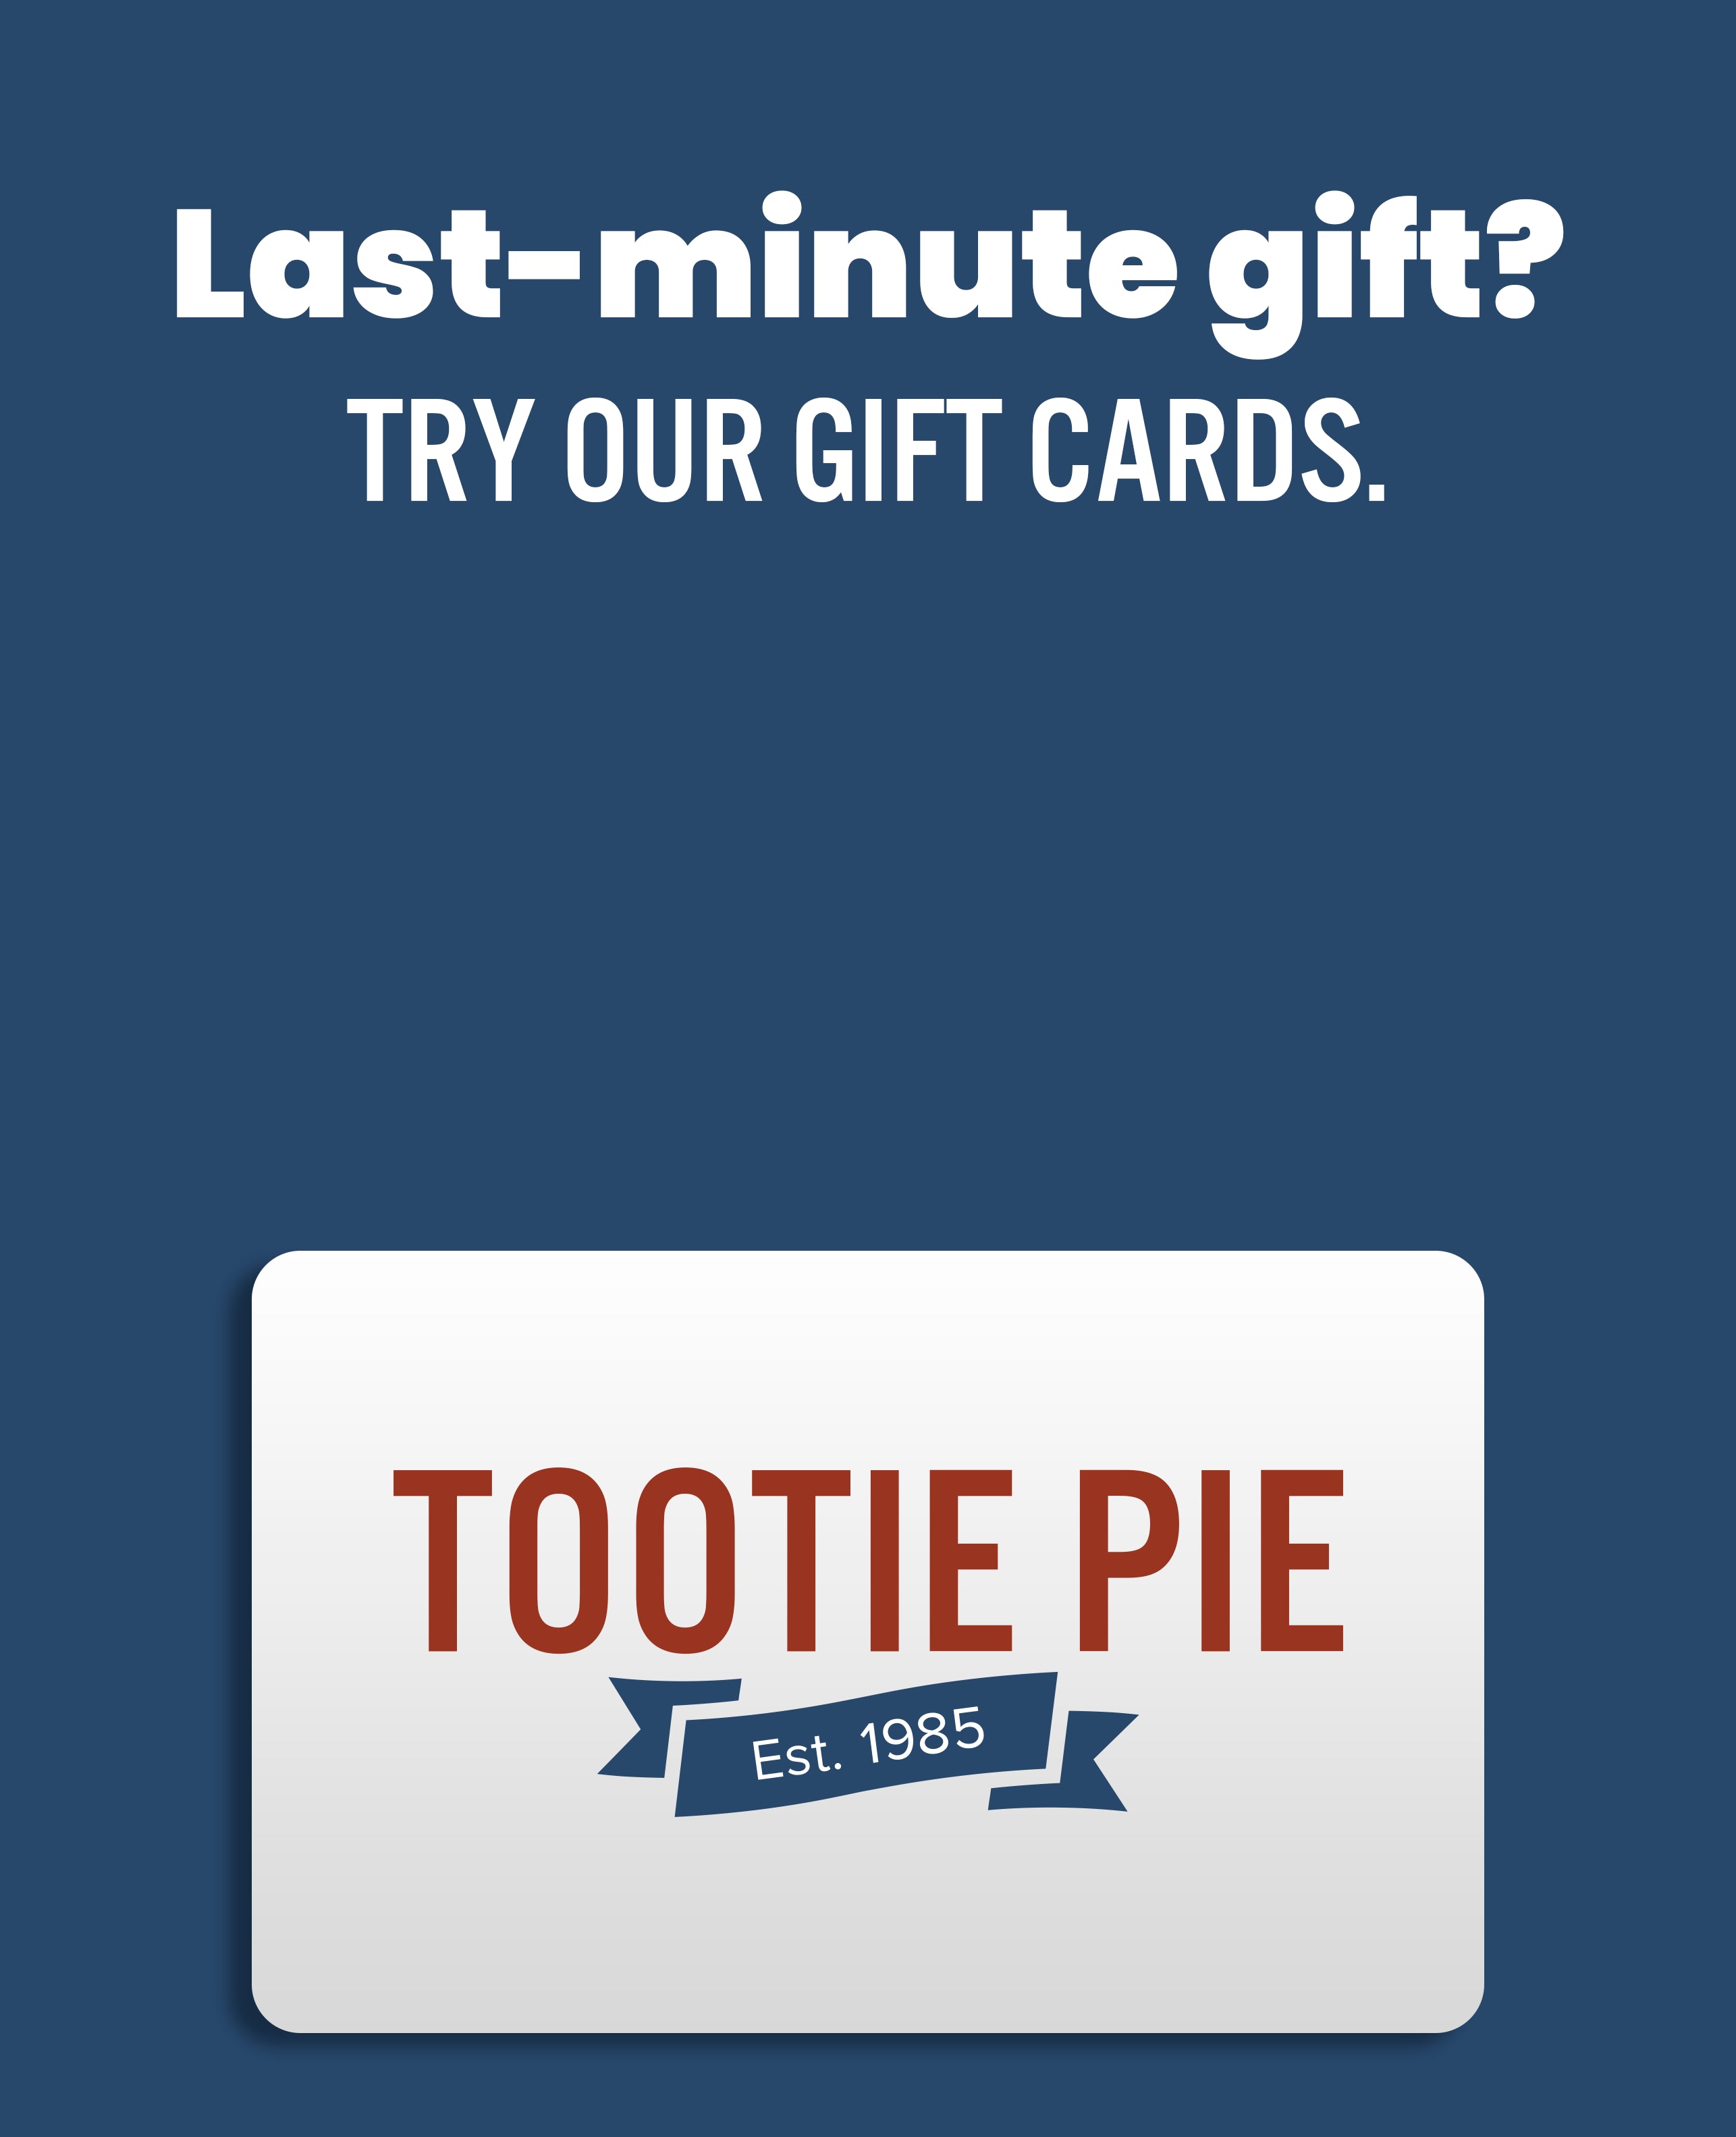 Last-minute gift? Try our gift cards.